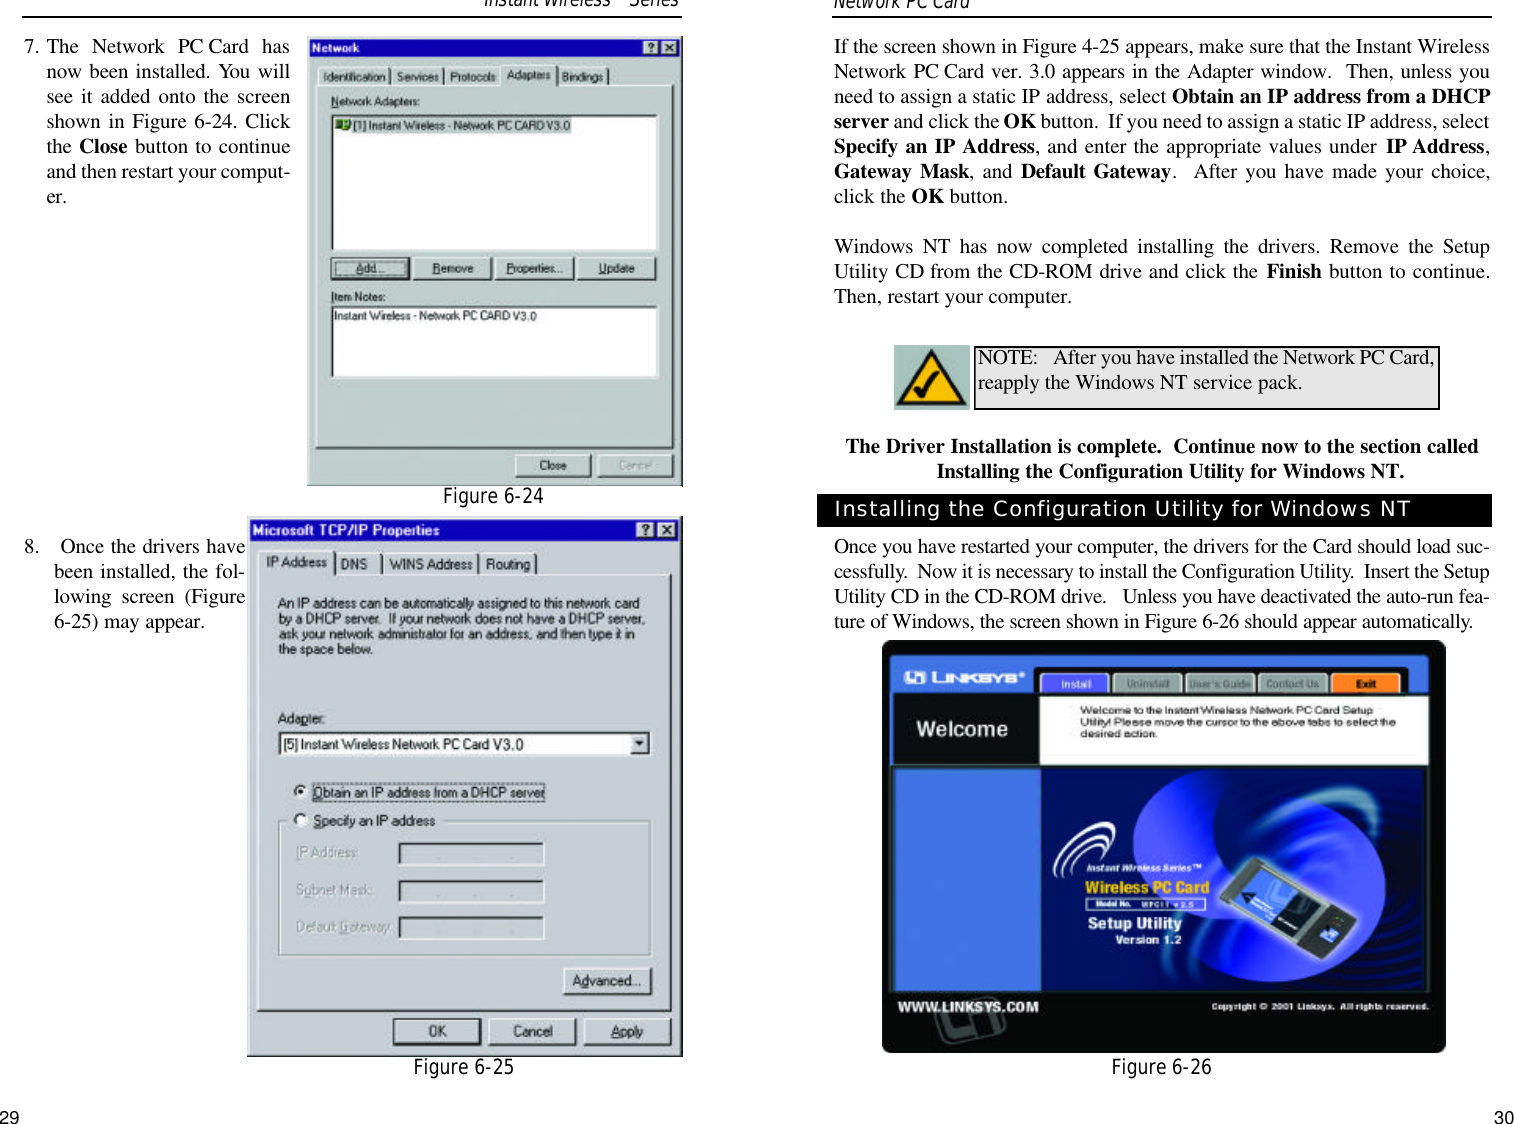 If the screen shown in Figure 4-25 appears, make sure that the Instant WirelessNetwork PC Card ver. 3.0 appears in the Adapter window.  Then, unless youneed to assign a static IP address, select Obtain an IP address from a DHCPserver and click the OK button.  If you need to assign a static IP address, selectSpecify an IP Address, and enter the appropriate values under IP Address,Gateway Mask, and Default Gateway.  After you have made your choice,click the OK button.  Windows NT has now completed installing the drivers. Remove the SetupUtility CD from the CD-ROM drive and click the Finish button to continue.Then, restart your computer.  The Driver Installation is complete.  Continue now to the section calledInstalling the Configuration Utility for Windows NT.Once you have restarted your computer, the drivers for the Card should load suc-cessfully.  Now it is necessary to install the Configuration Utility.  Insert the SetupUtility CD in the CD-ROM drive.   Unless you have deactivated the auto-run fea-ture of Windows, the screen shown in Figure 6-26 should appear automatically.  NOTE: After you have installed the Network PC Card,reapply the Windows NT service pack.Installing the Configuration Utility for Windows NTFigure 6-267. The Network PC Card hasnow been installed. You willsee it added onto the screenshown in Figure 6-24. Clickthe Close button to continueand then restart your comput-er. 8. Once the drivers havebeen installed, the fol-lowing screen (Figure6-25) may appear.  Network PC Card Figure 6-24Figure 6-25Instant WirelessTMSeries29 30